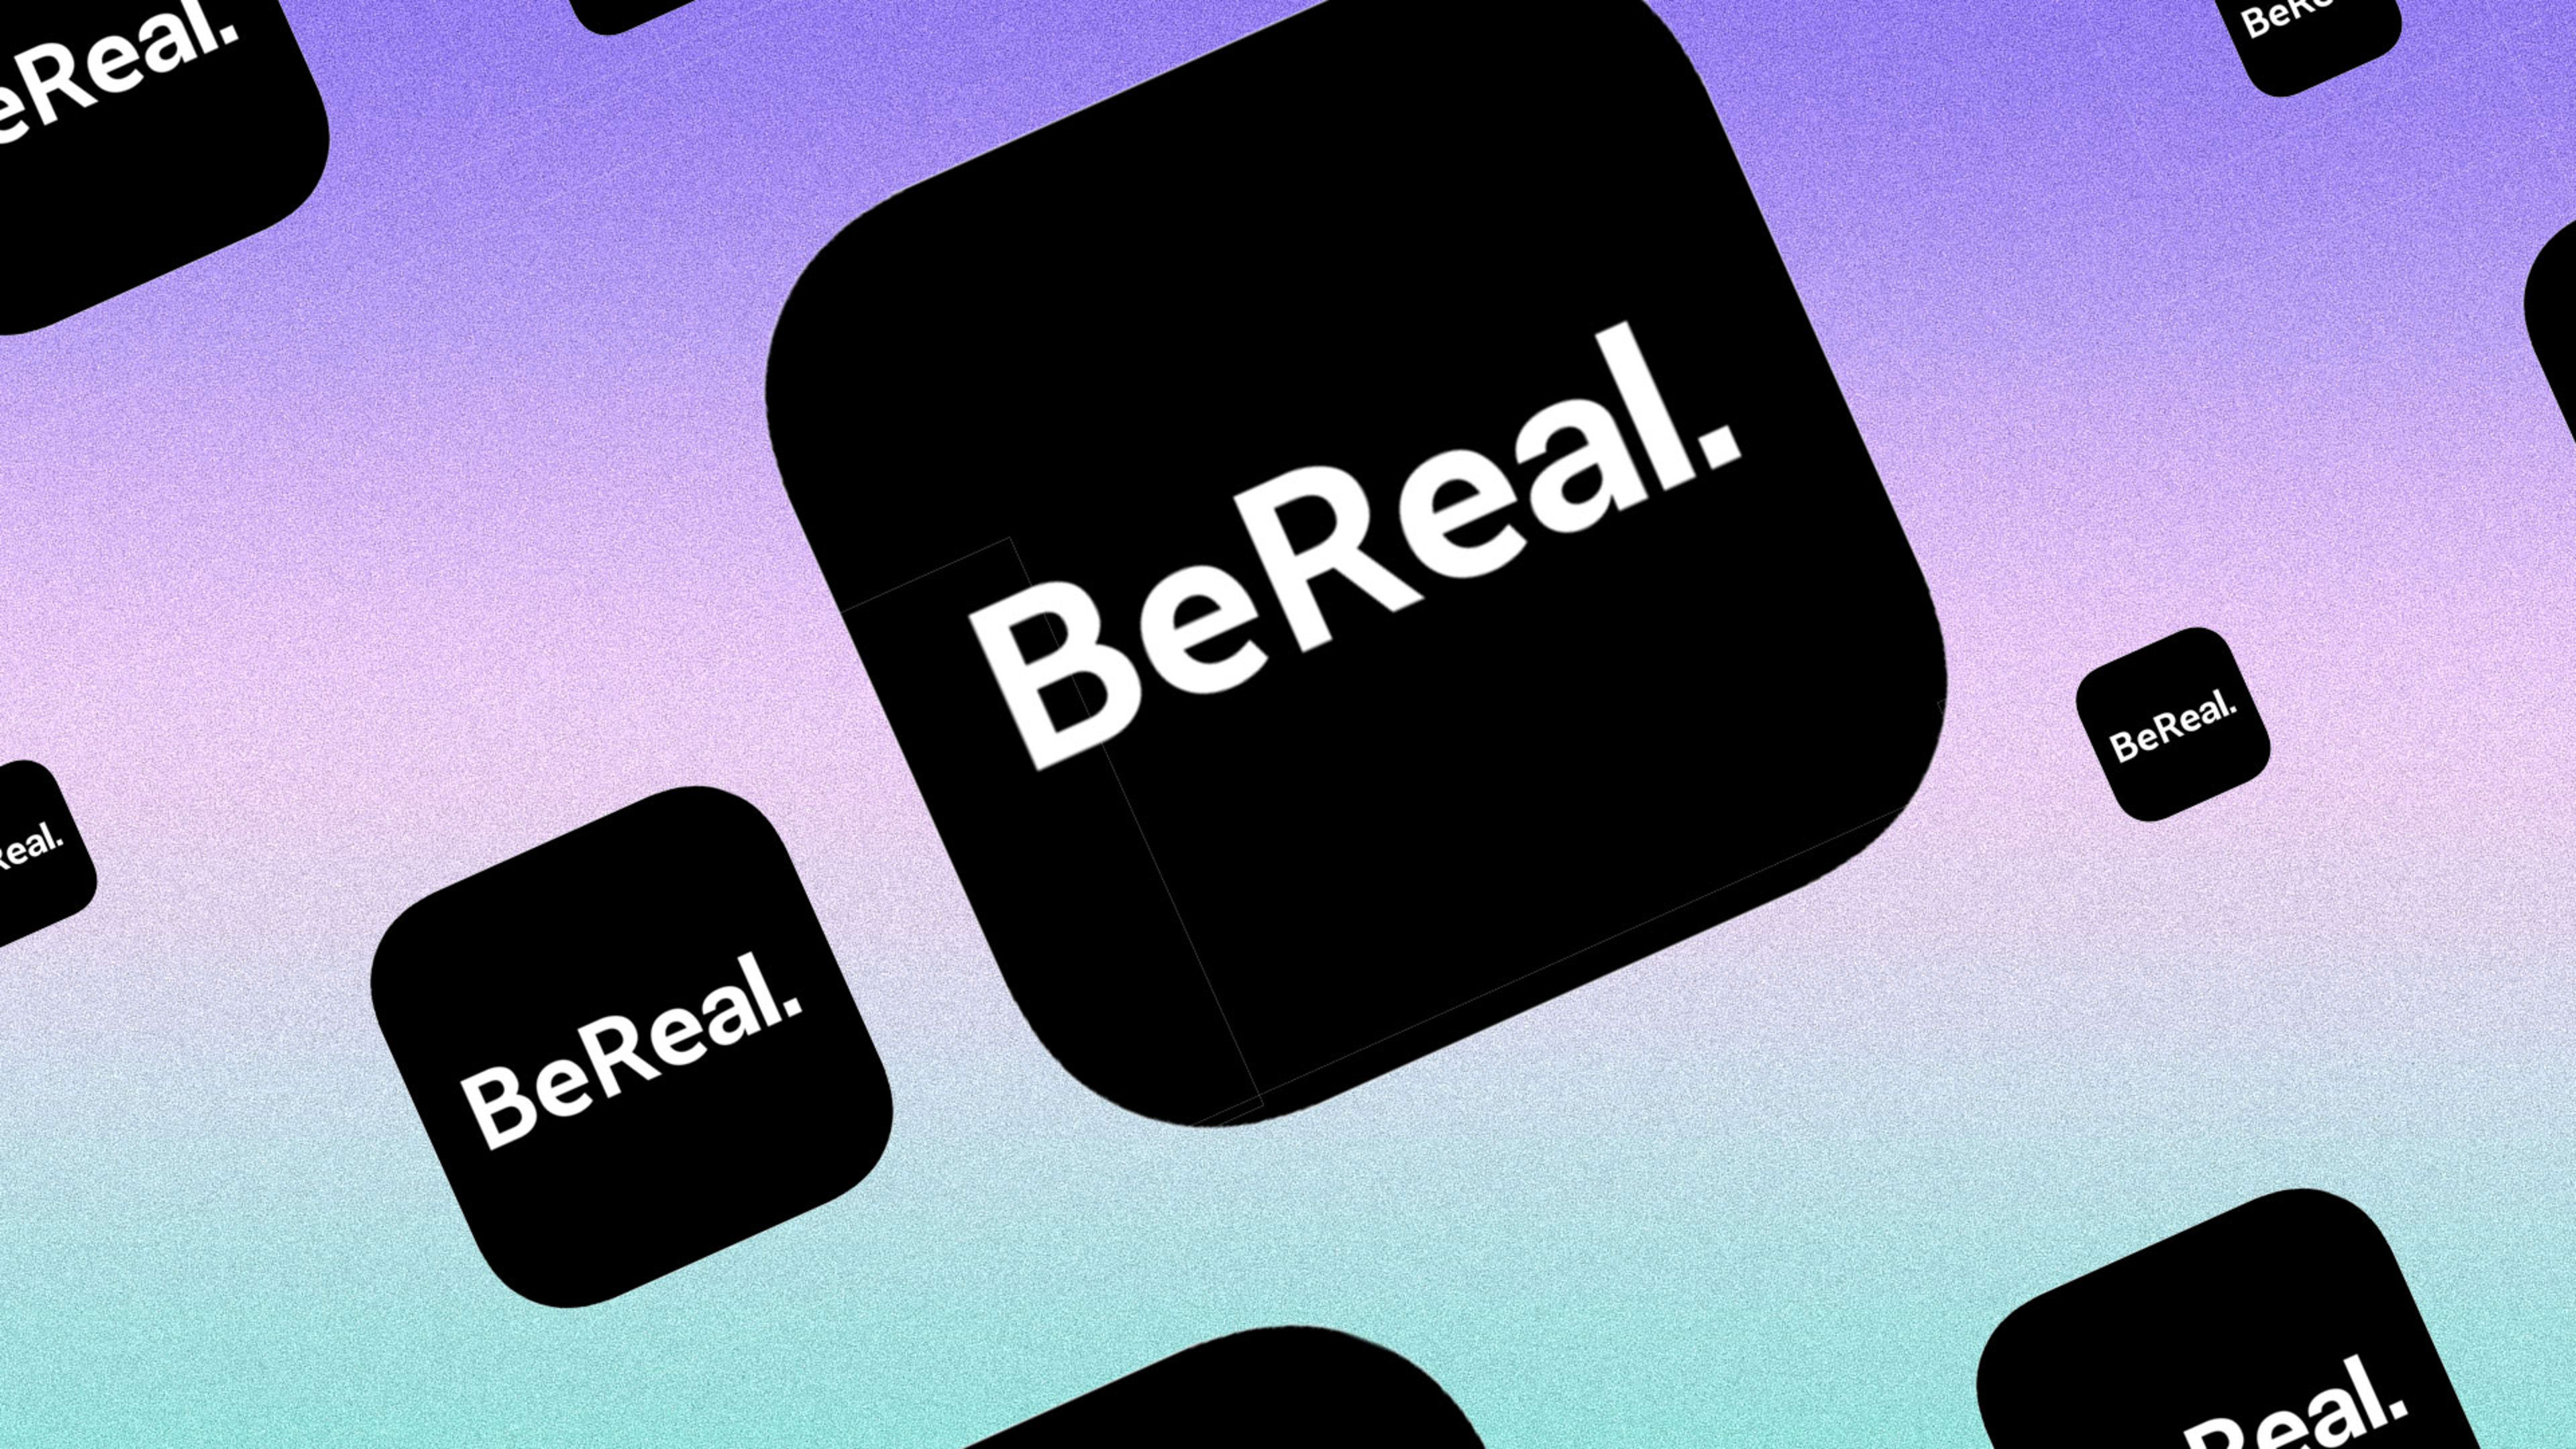 Fad or frenzy, BeReal is having a real moment right now